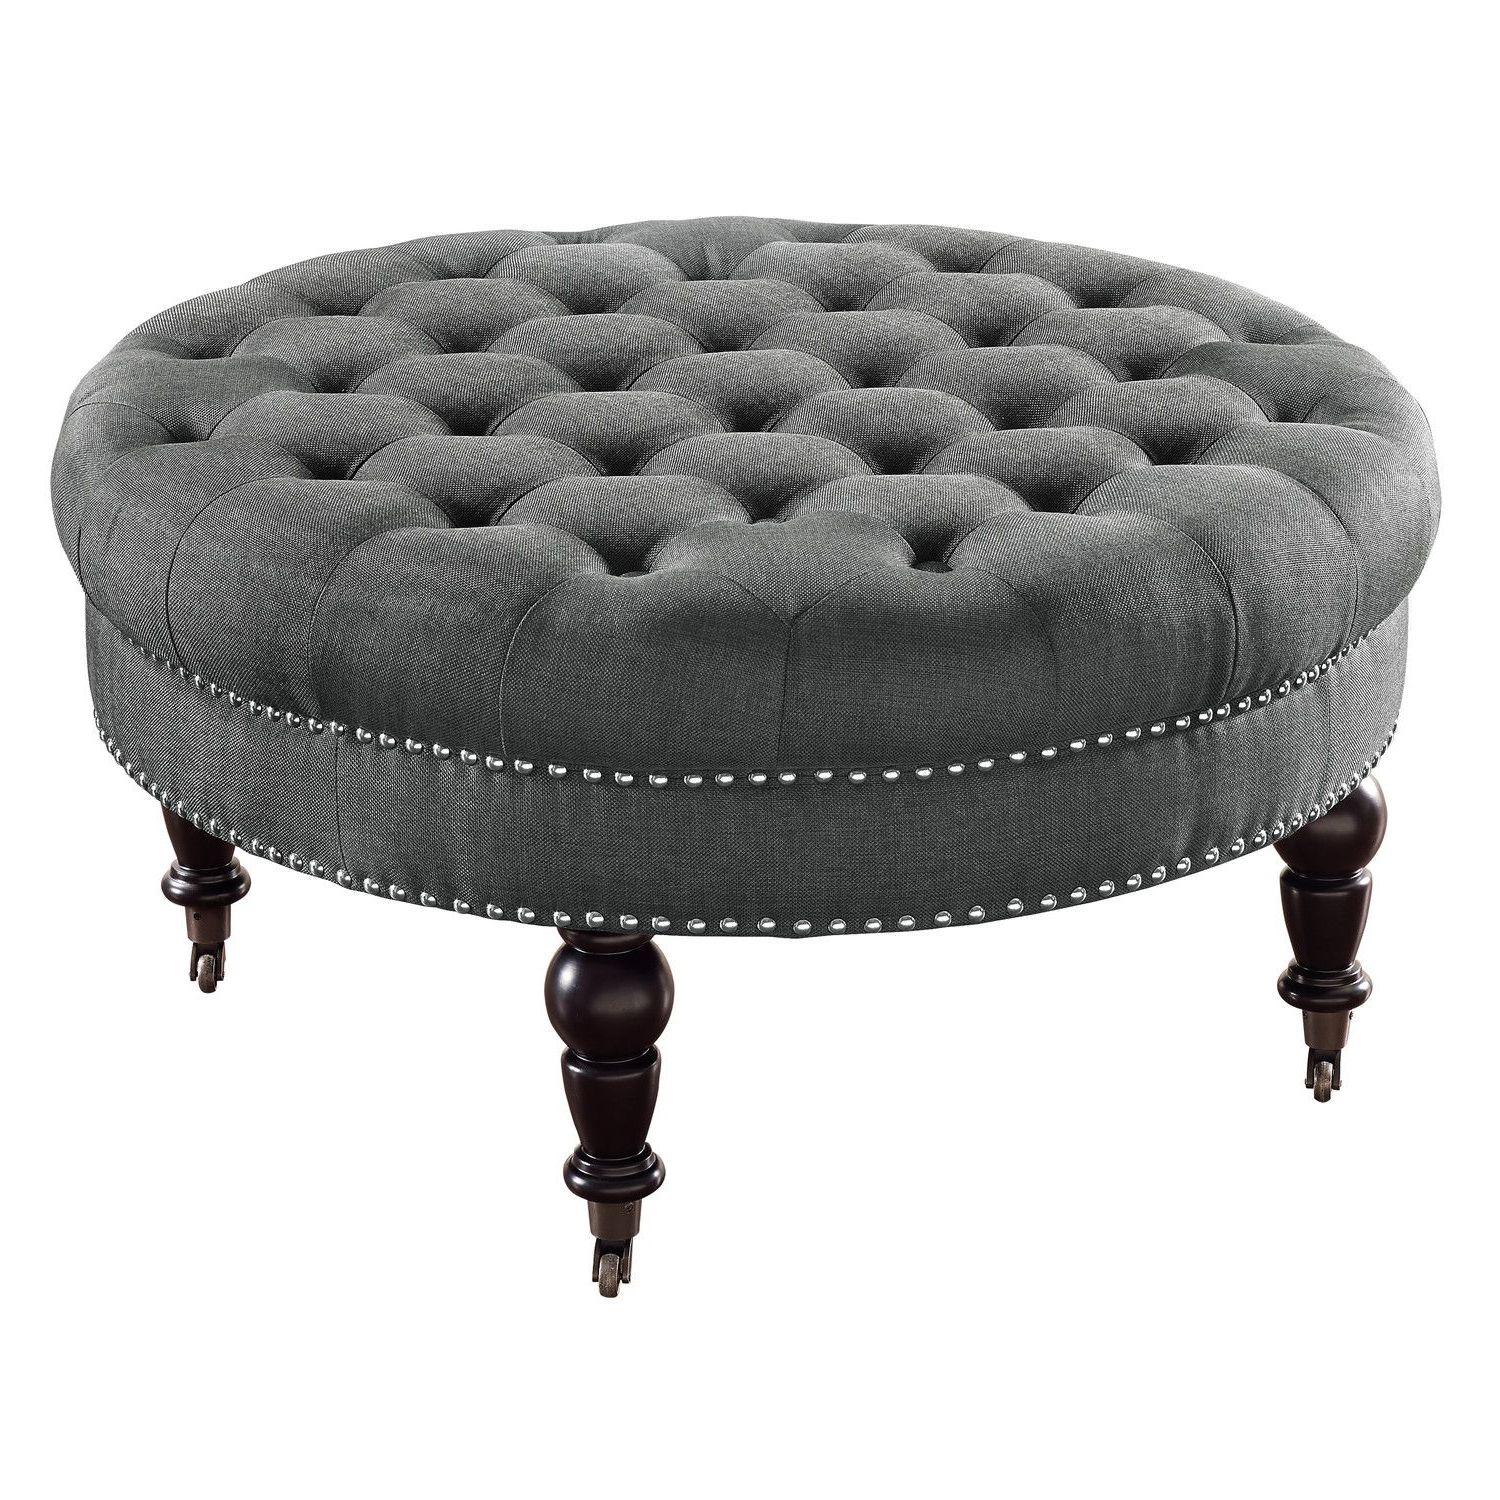 Newest Grey Leather Round Ottoman (View 10 of 10)